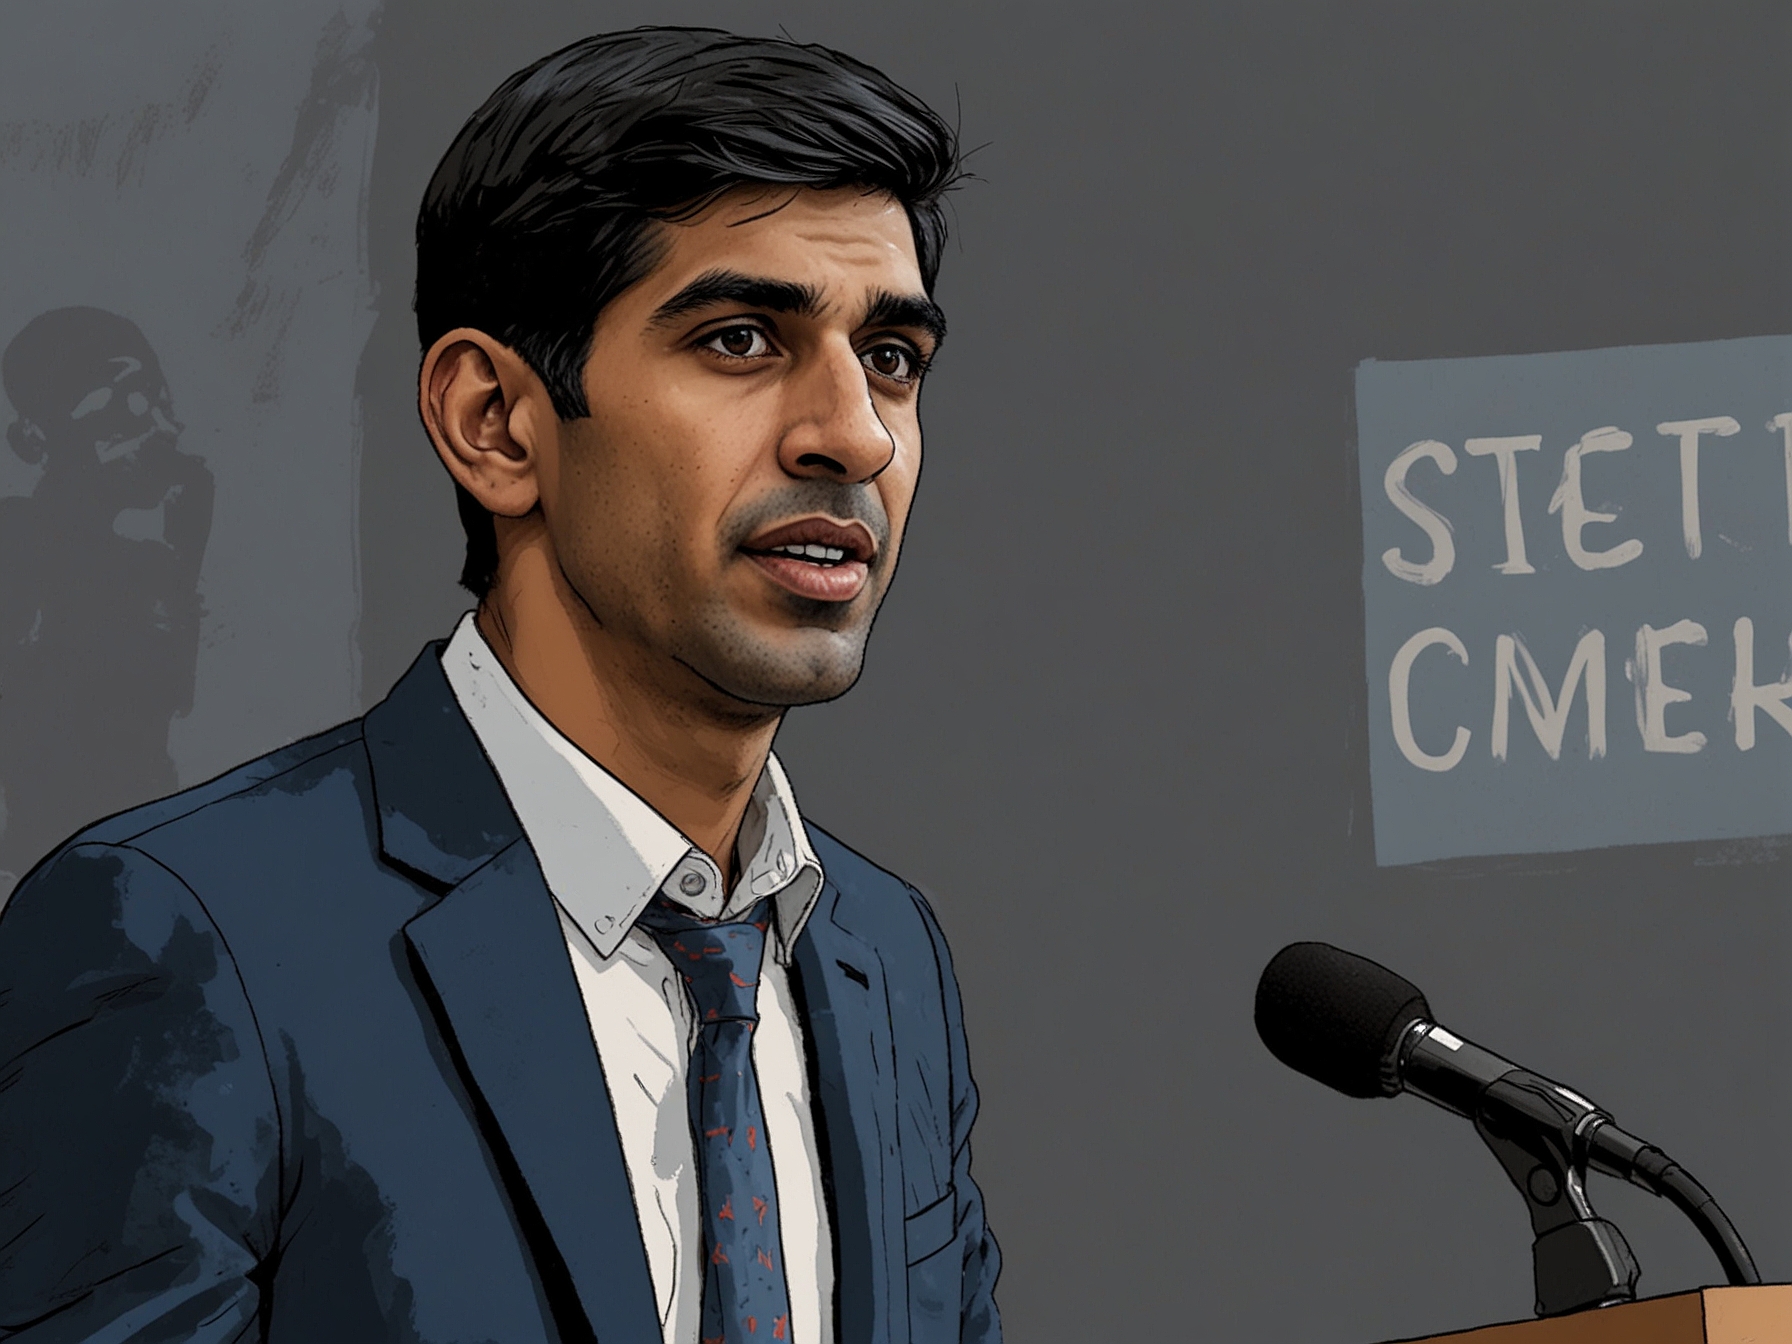 Rishi Sunak at a press conference addressing questions about his stance on assisted dying legislation.